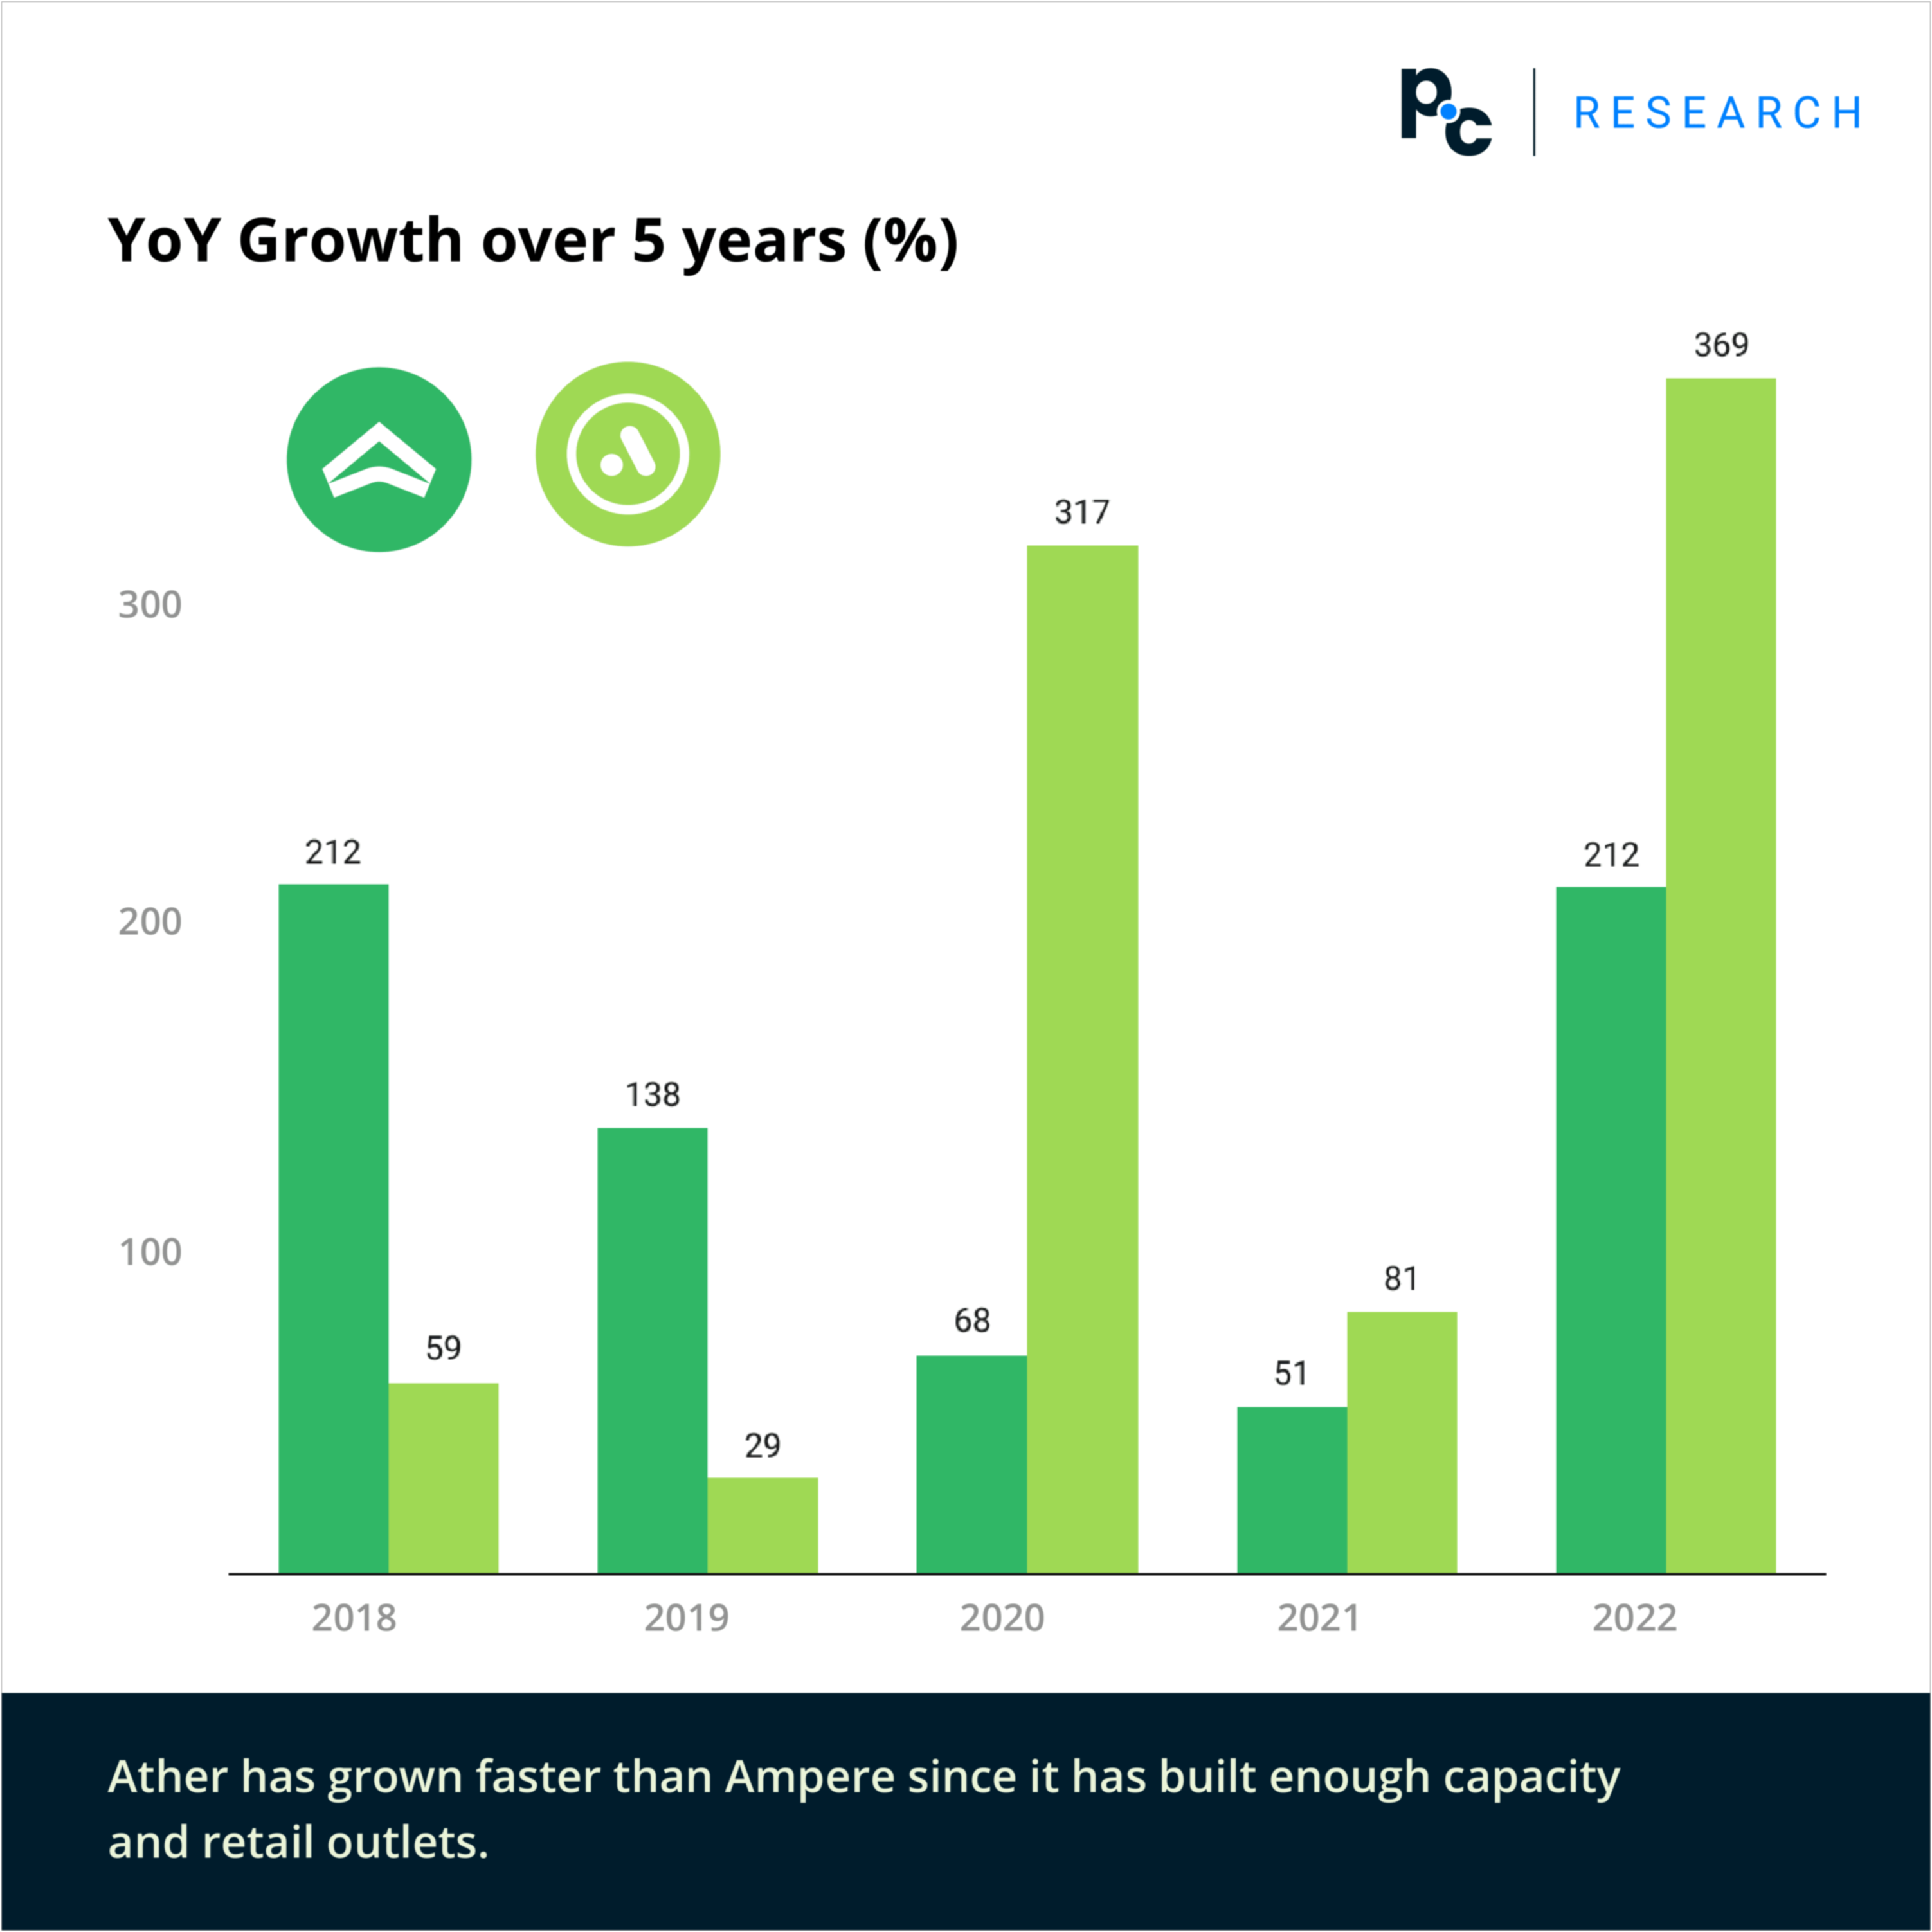 Year-on-year growth of Ampere and Ather over 5 years as seen on PrivateCircle Research.